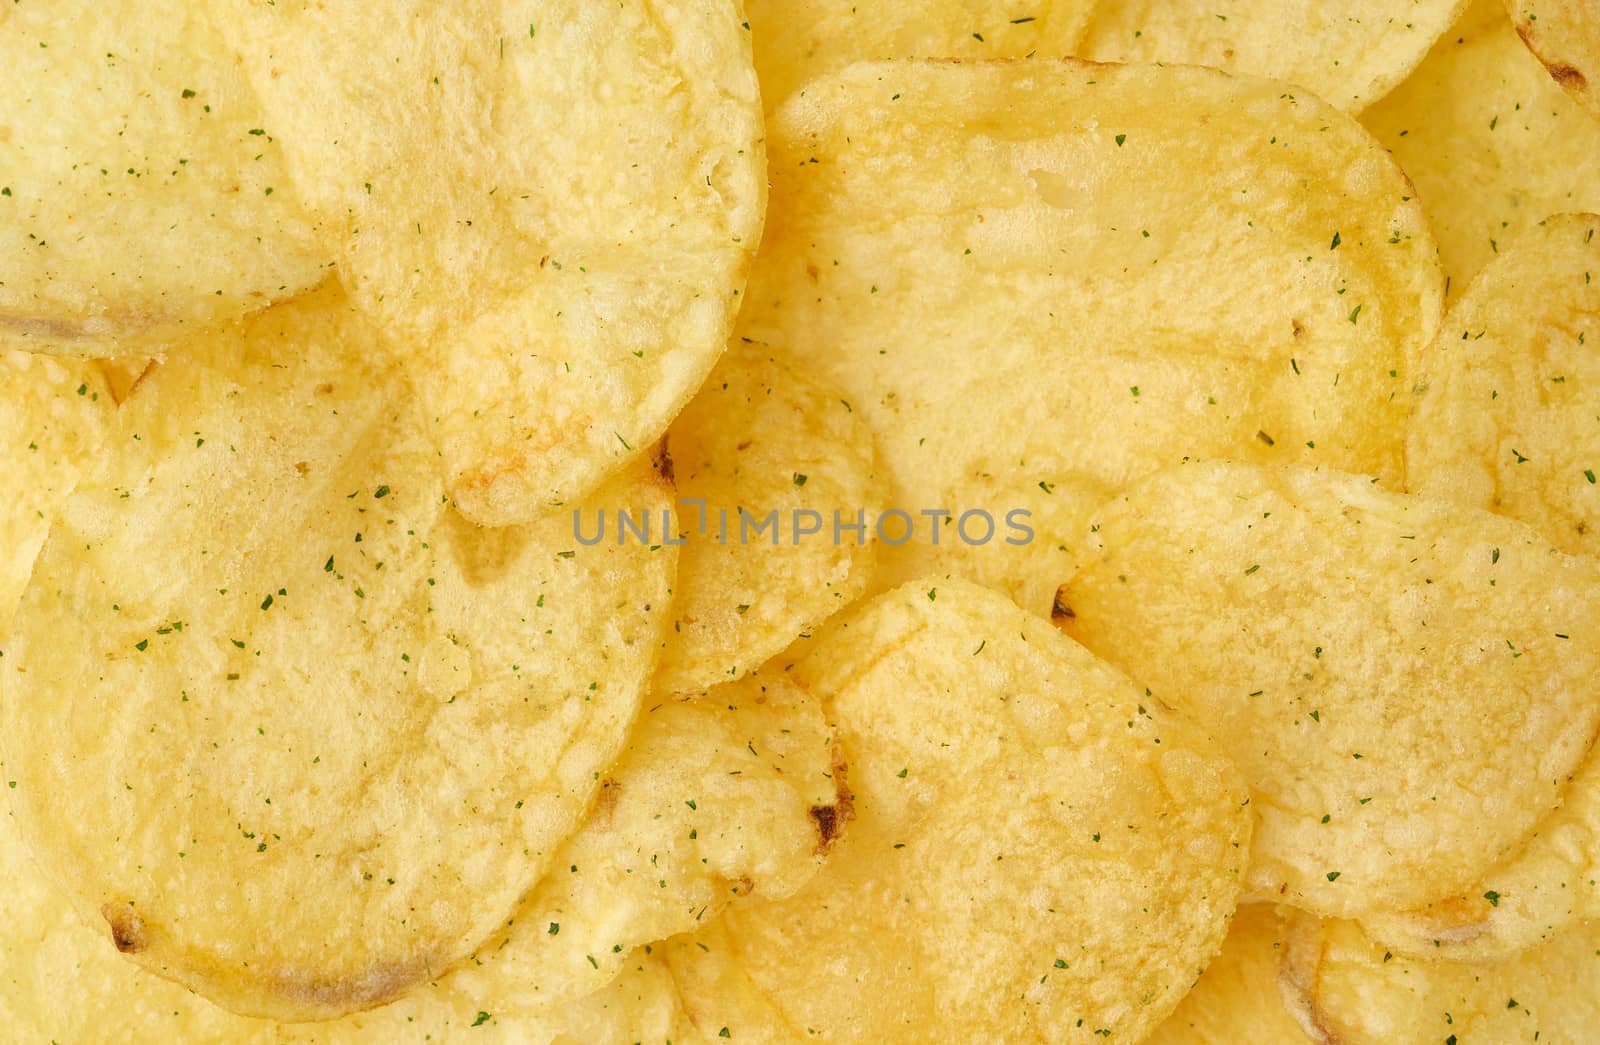 heap of round yellow fried potato chips with dill, food with spi by ndanko